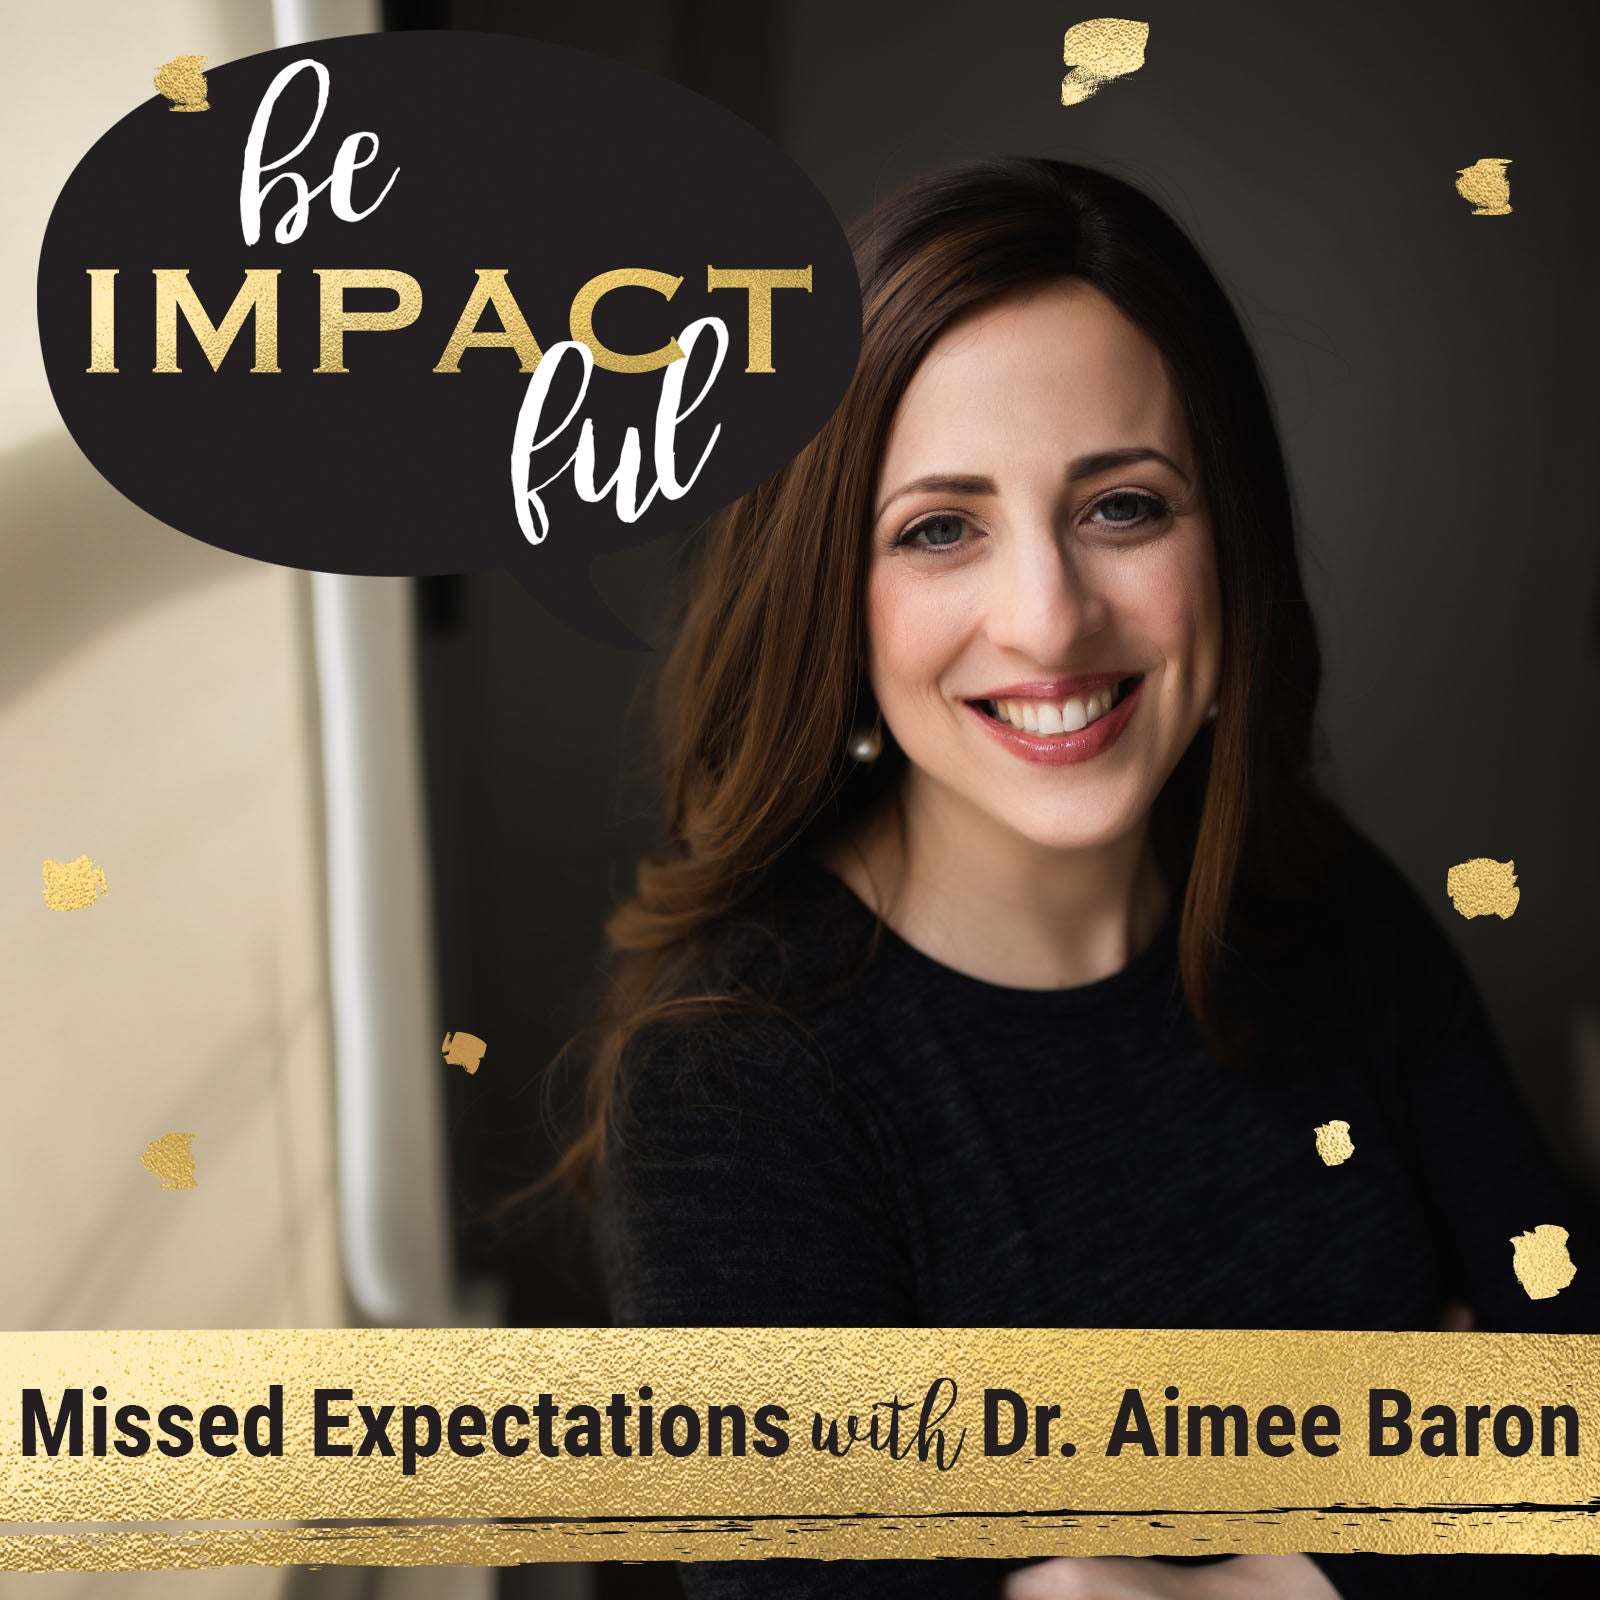 Missed Expectations with Dr. Aimee Baron